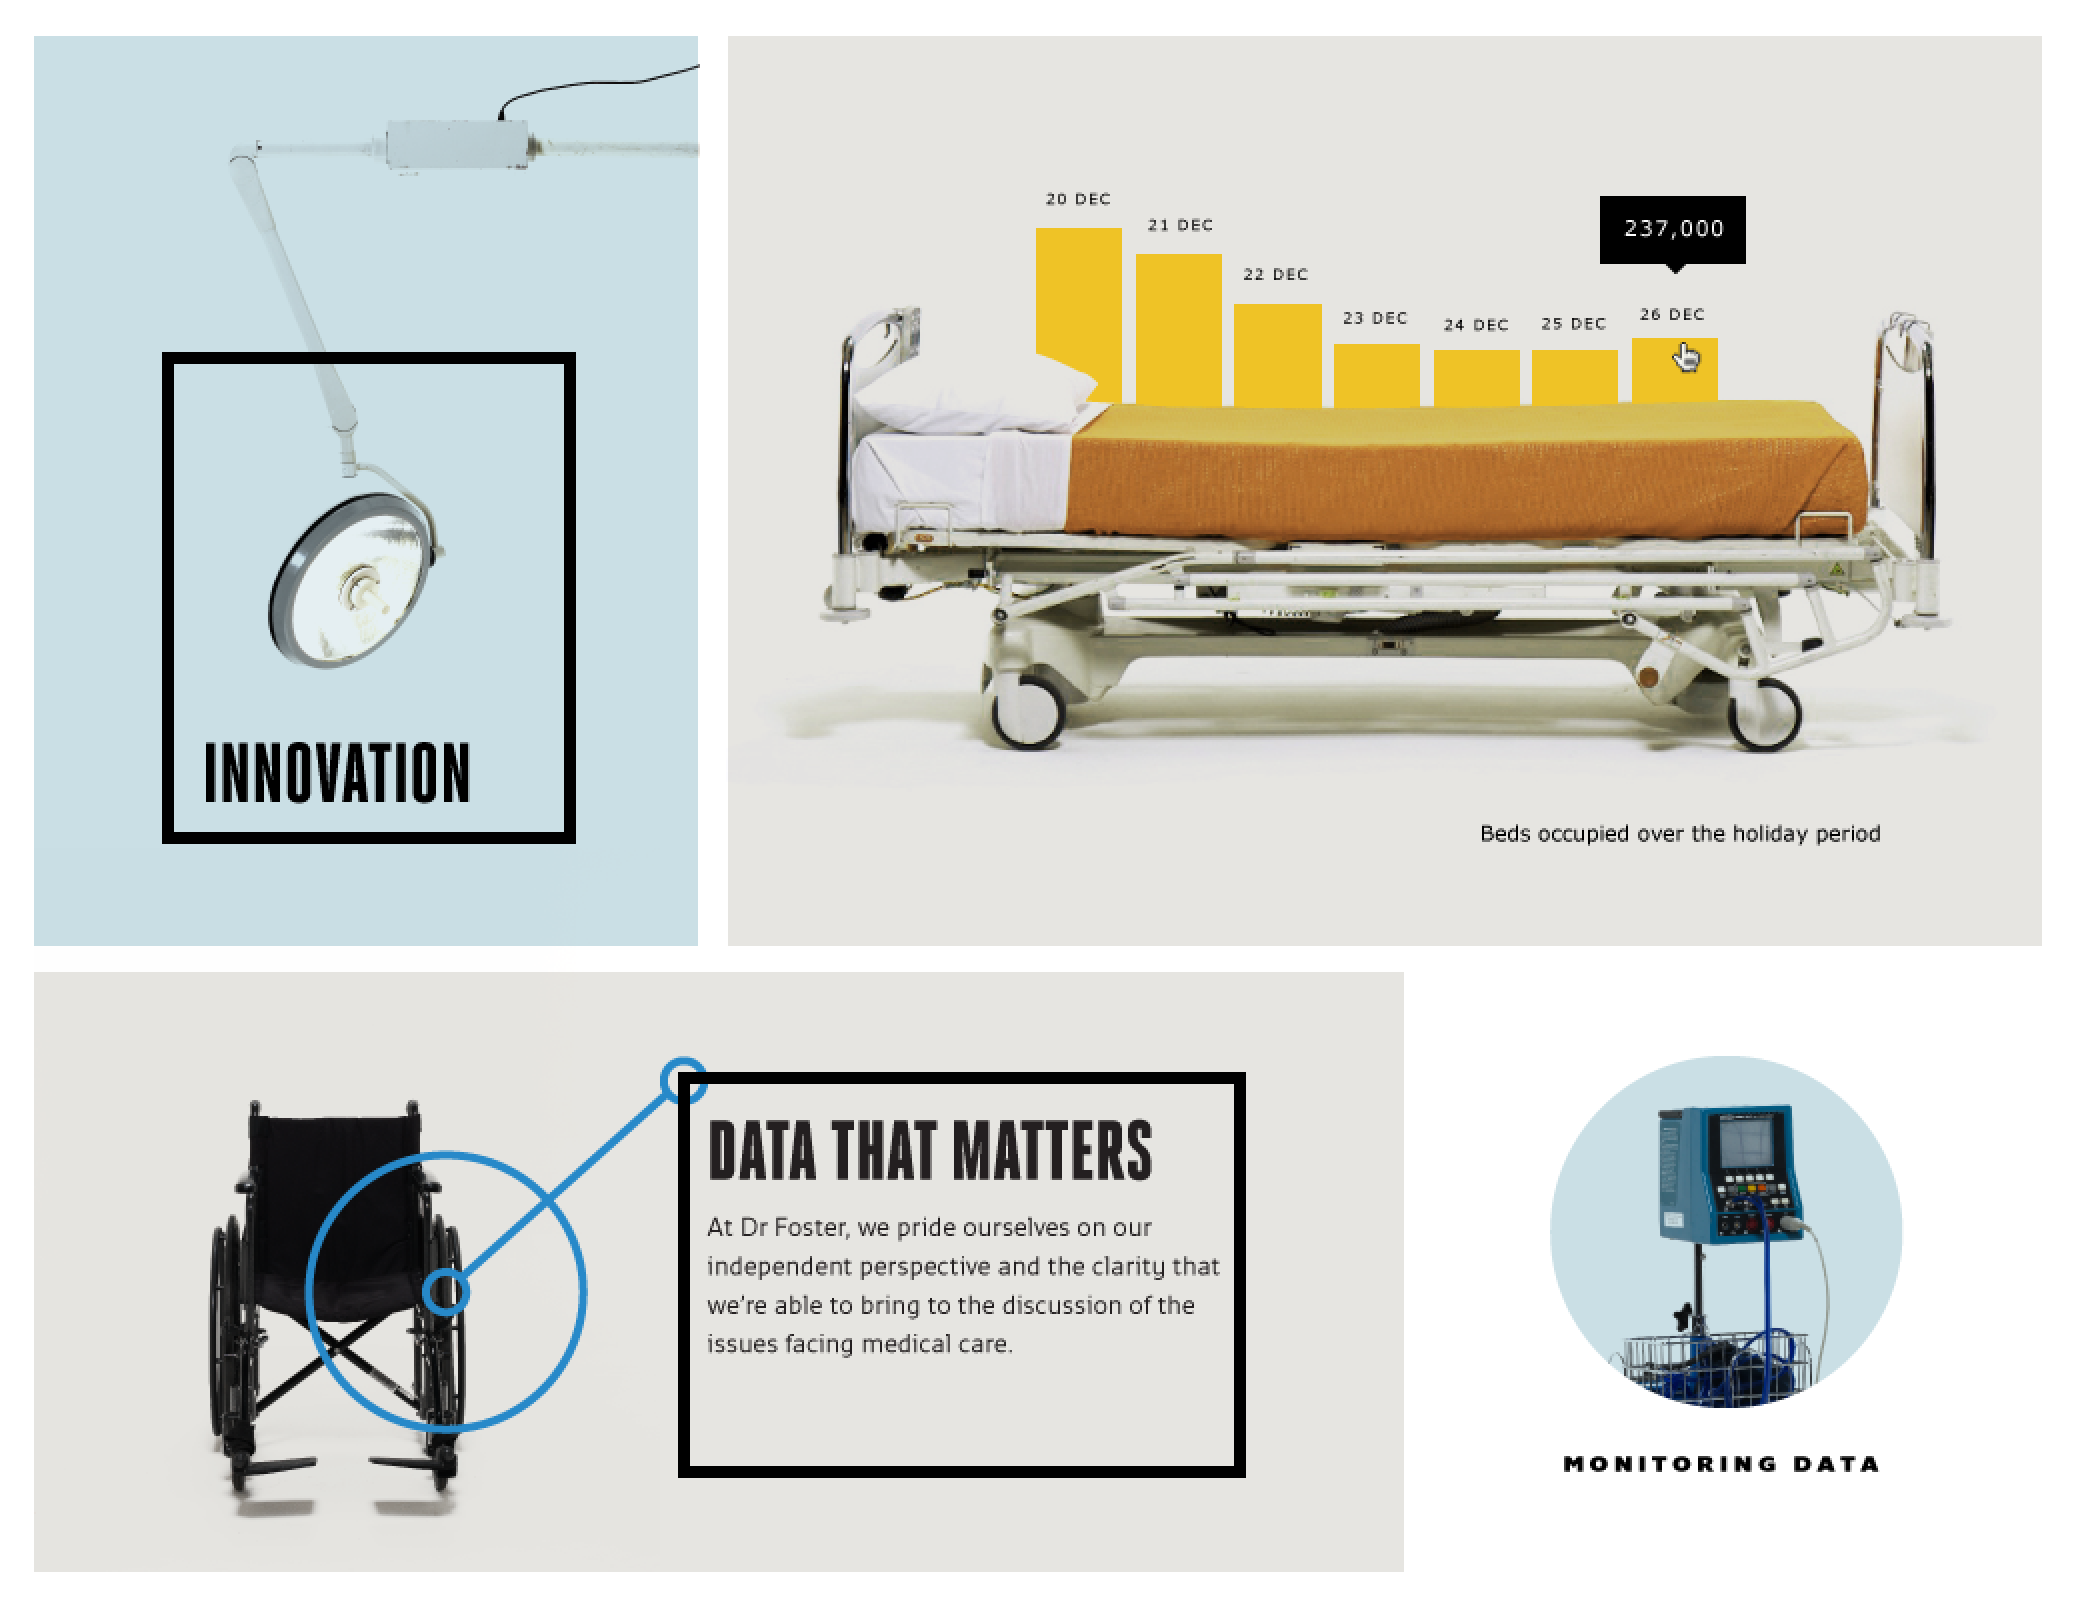 examples of the Dr Foster brand showing hospital equipment overlaid with infographics and editorial content